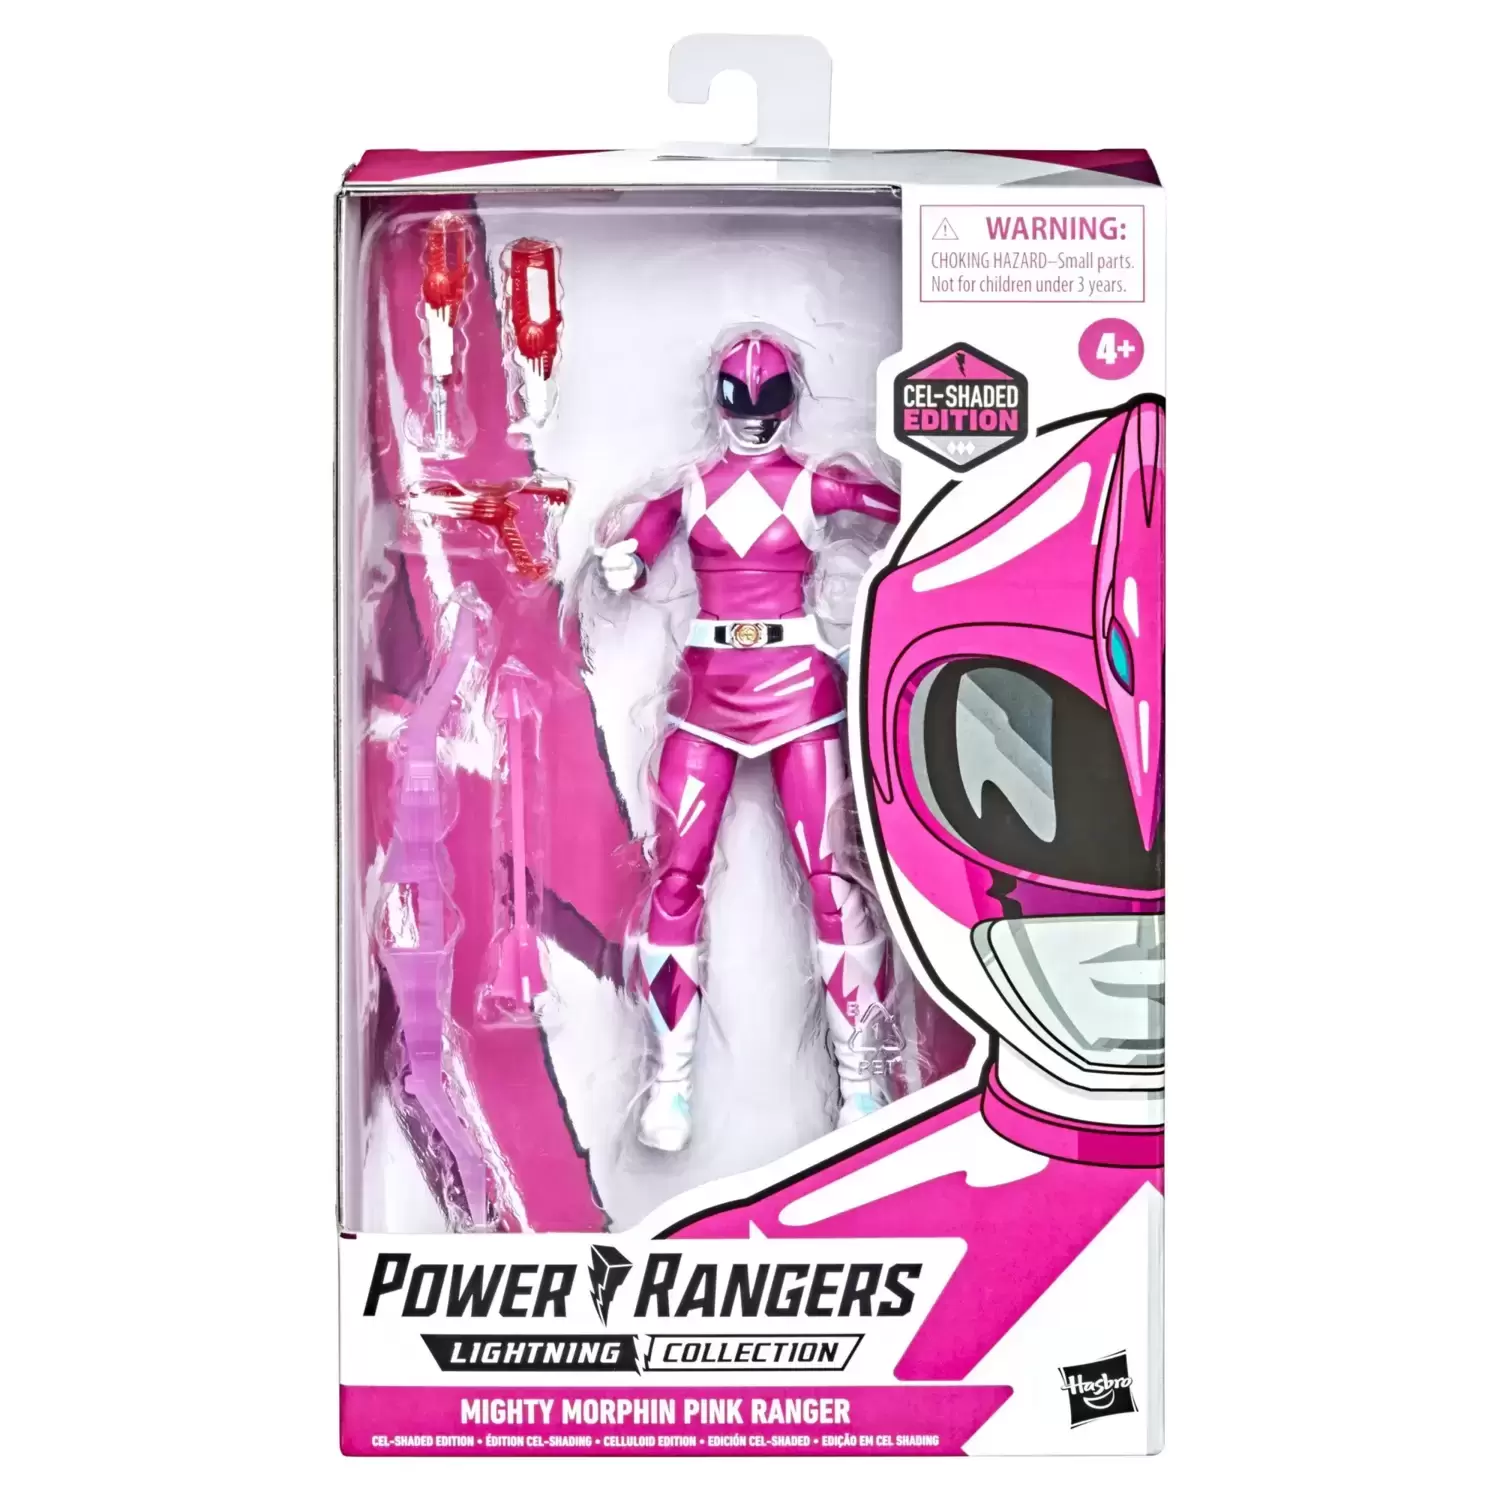 Power Rangers Hasbro - Lightning Collection - Mighty Morphin Pink Ranger (Cel-Shaded Edition)